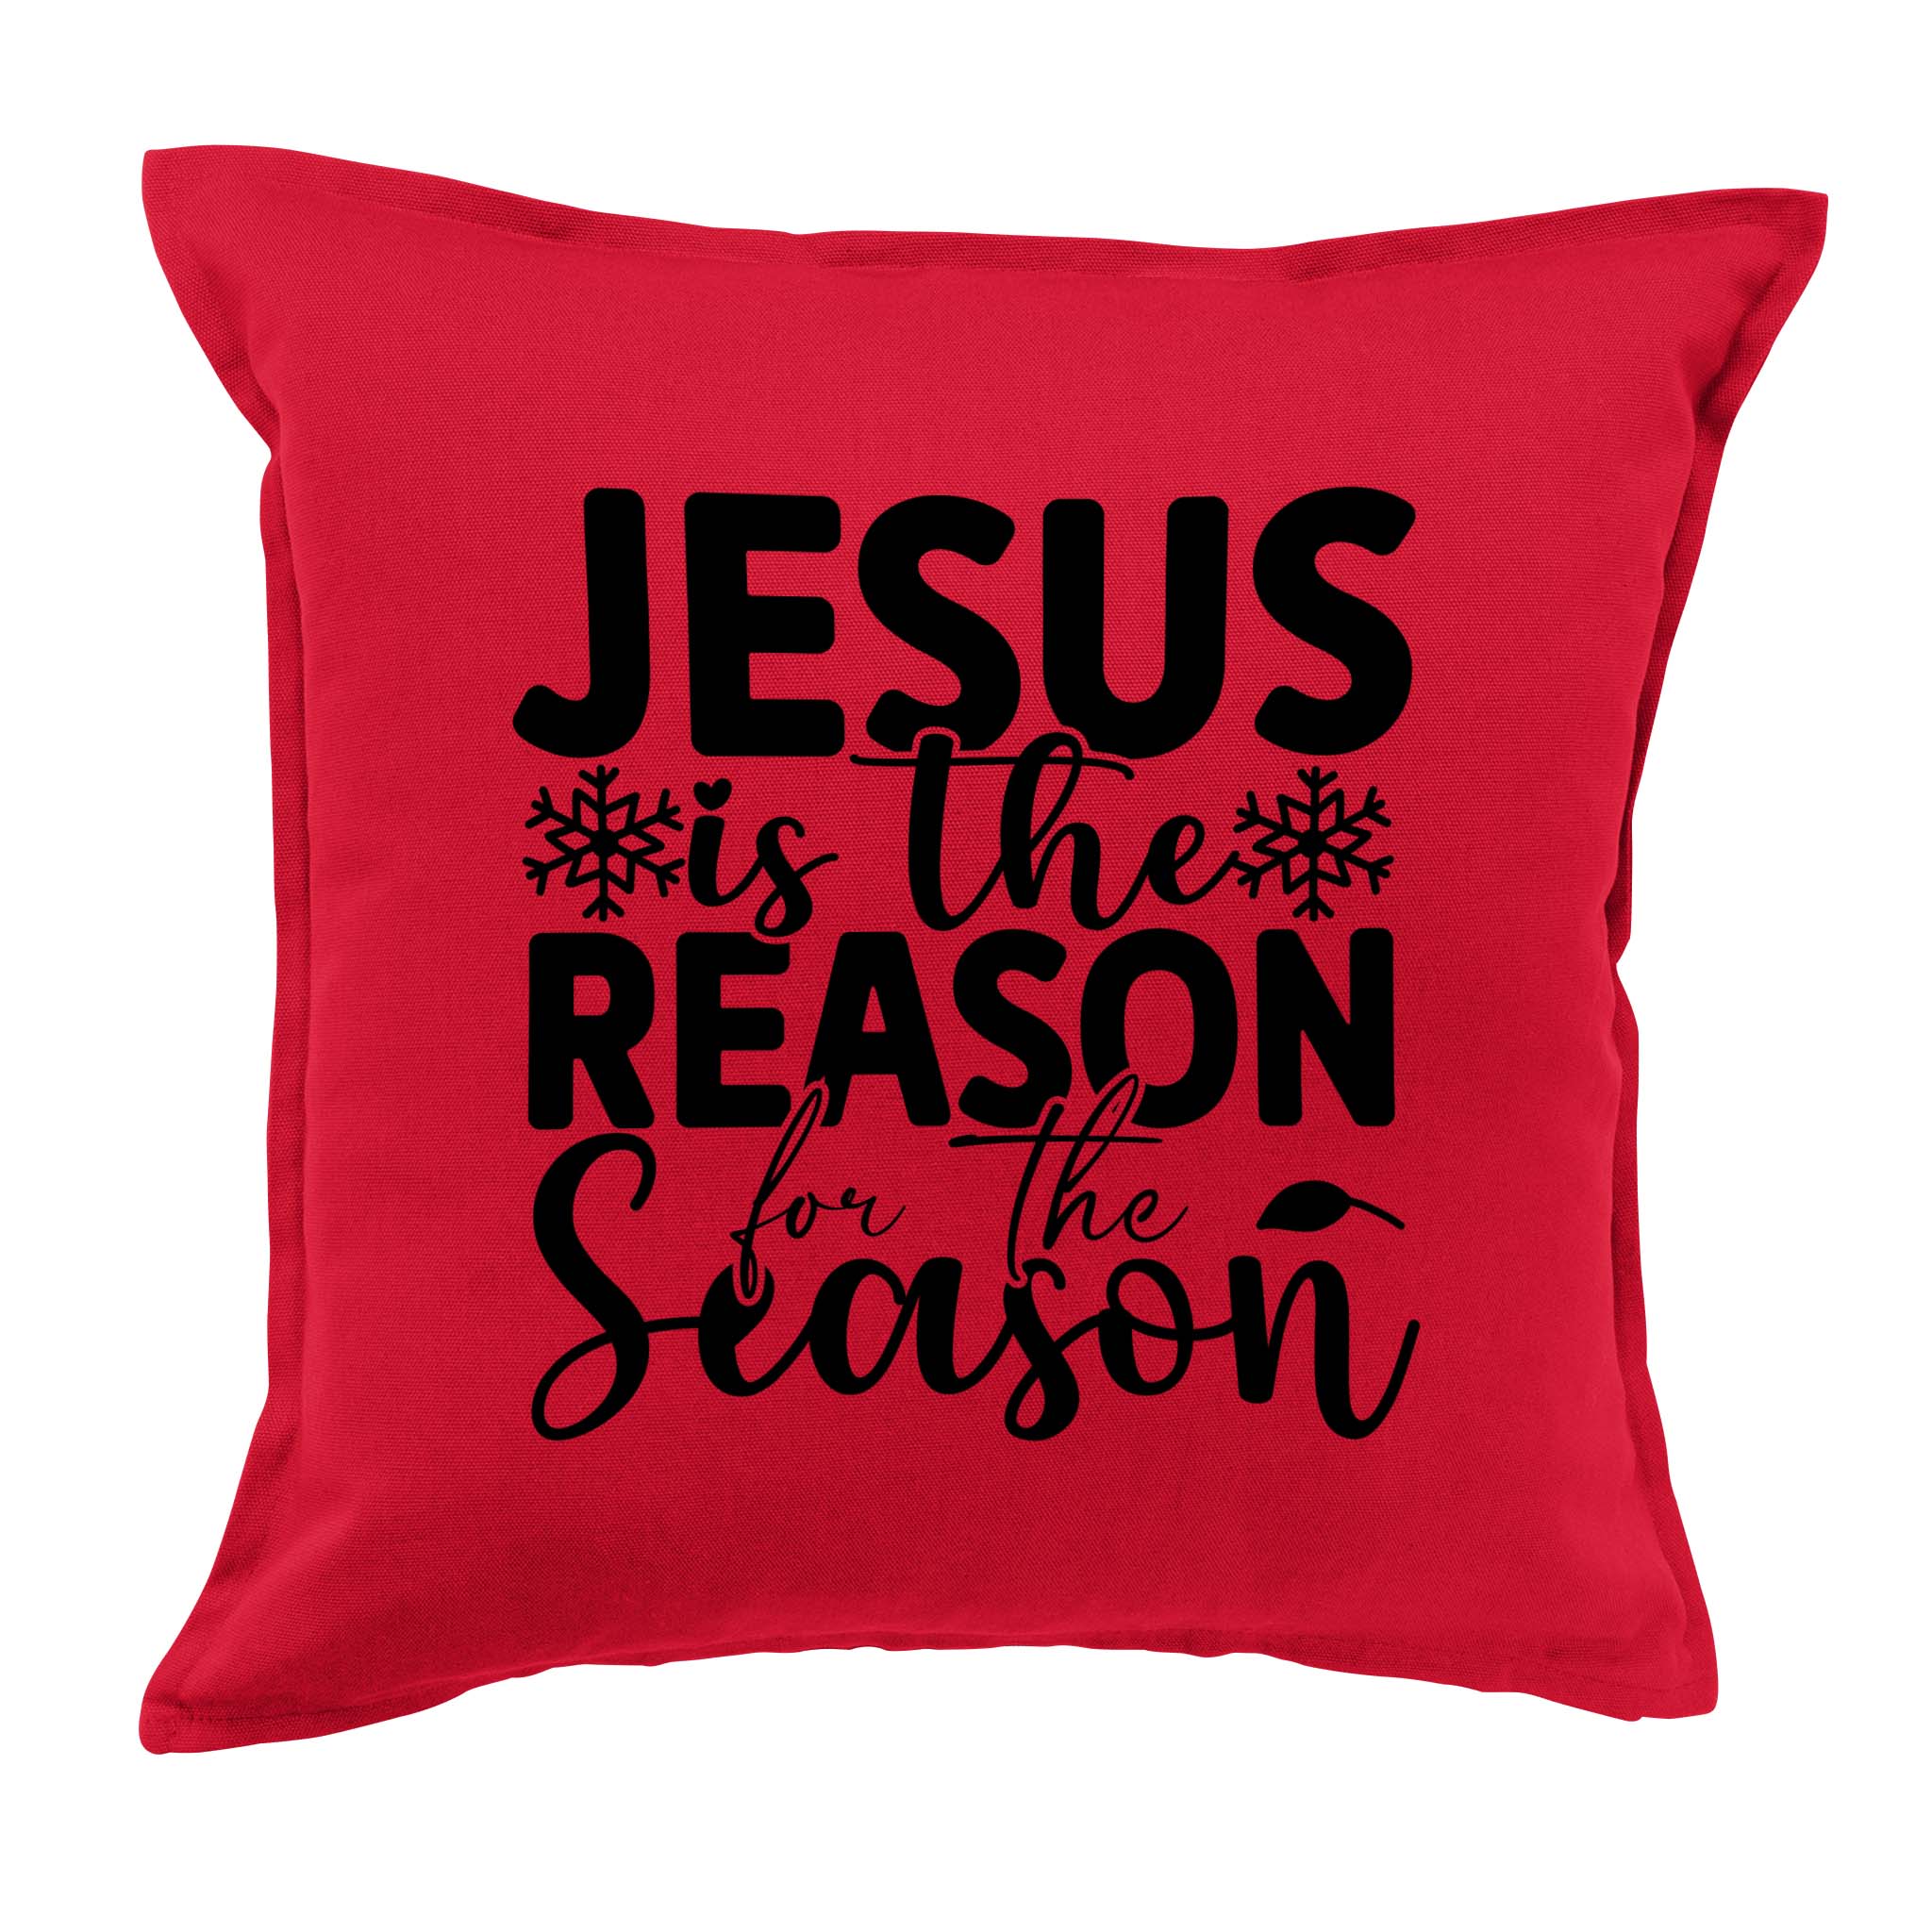 Girl runs on Jesus and Directing Throw Pillow Multicolor 18x18 